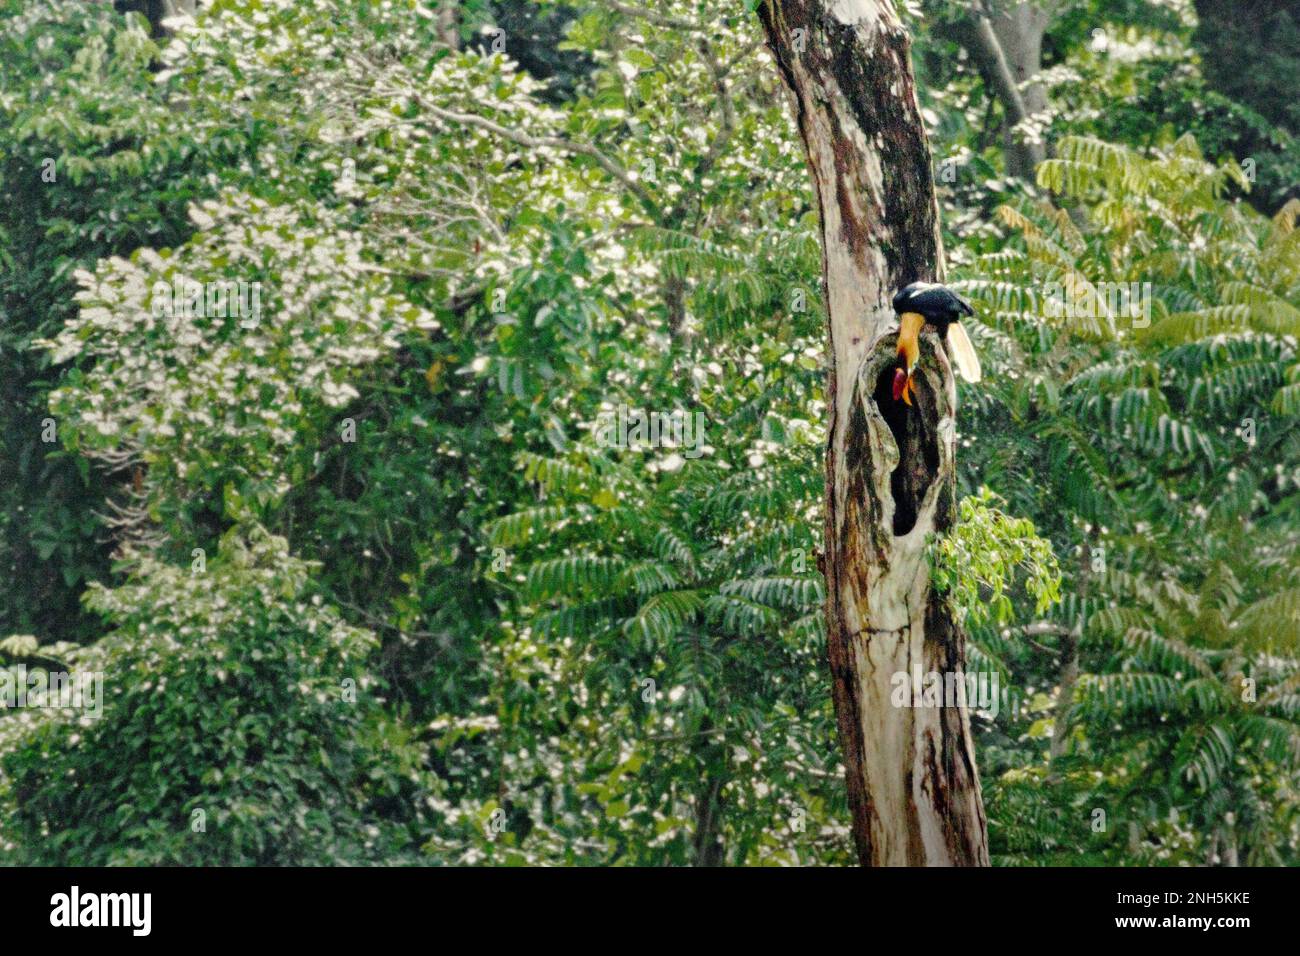 A male individual of knobbed hornbill, or sometimes called Sulawesi wrinkled hornbill (Rhyticeros cassidix), checks a hole on the trunk of a dead tree where it is perching in rainforest near Mount Tangkoko and DuaSudara in Bitung, North Sulawesi, Indonesia. The species is currently considered vulnerable to extinction due to logging and hunting, according to Amanda Hackett of Wildlife Conservation Society in a 2022 publication. 'With trees diminishing, there are no safe places for hornbill pairs to build their nests in large mature trees,' she added. Stock Photo